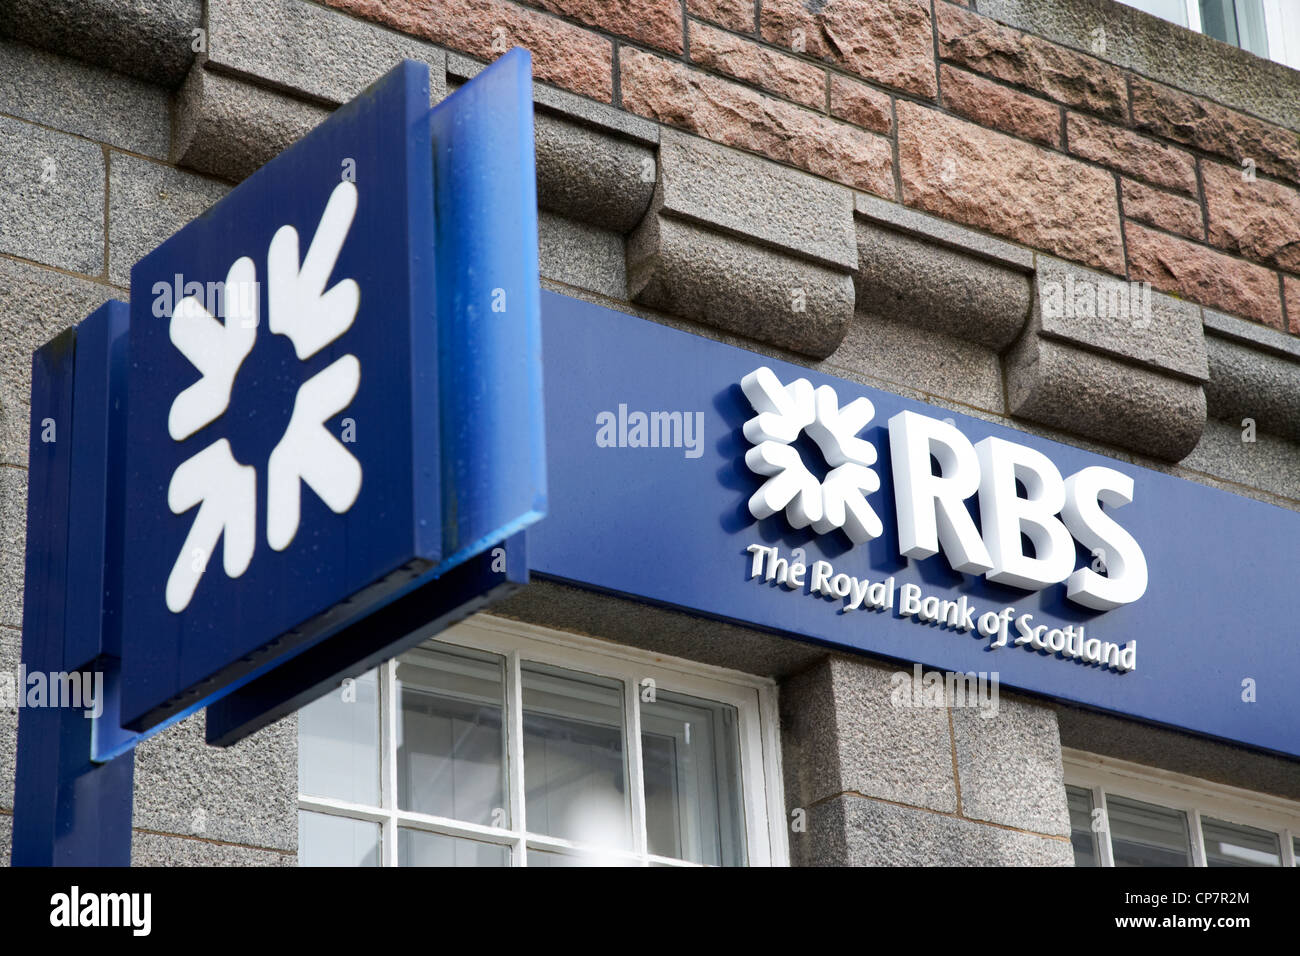 rbs royal bank of scotland bank branch in fort william Scotland UK Stock Photo